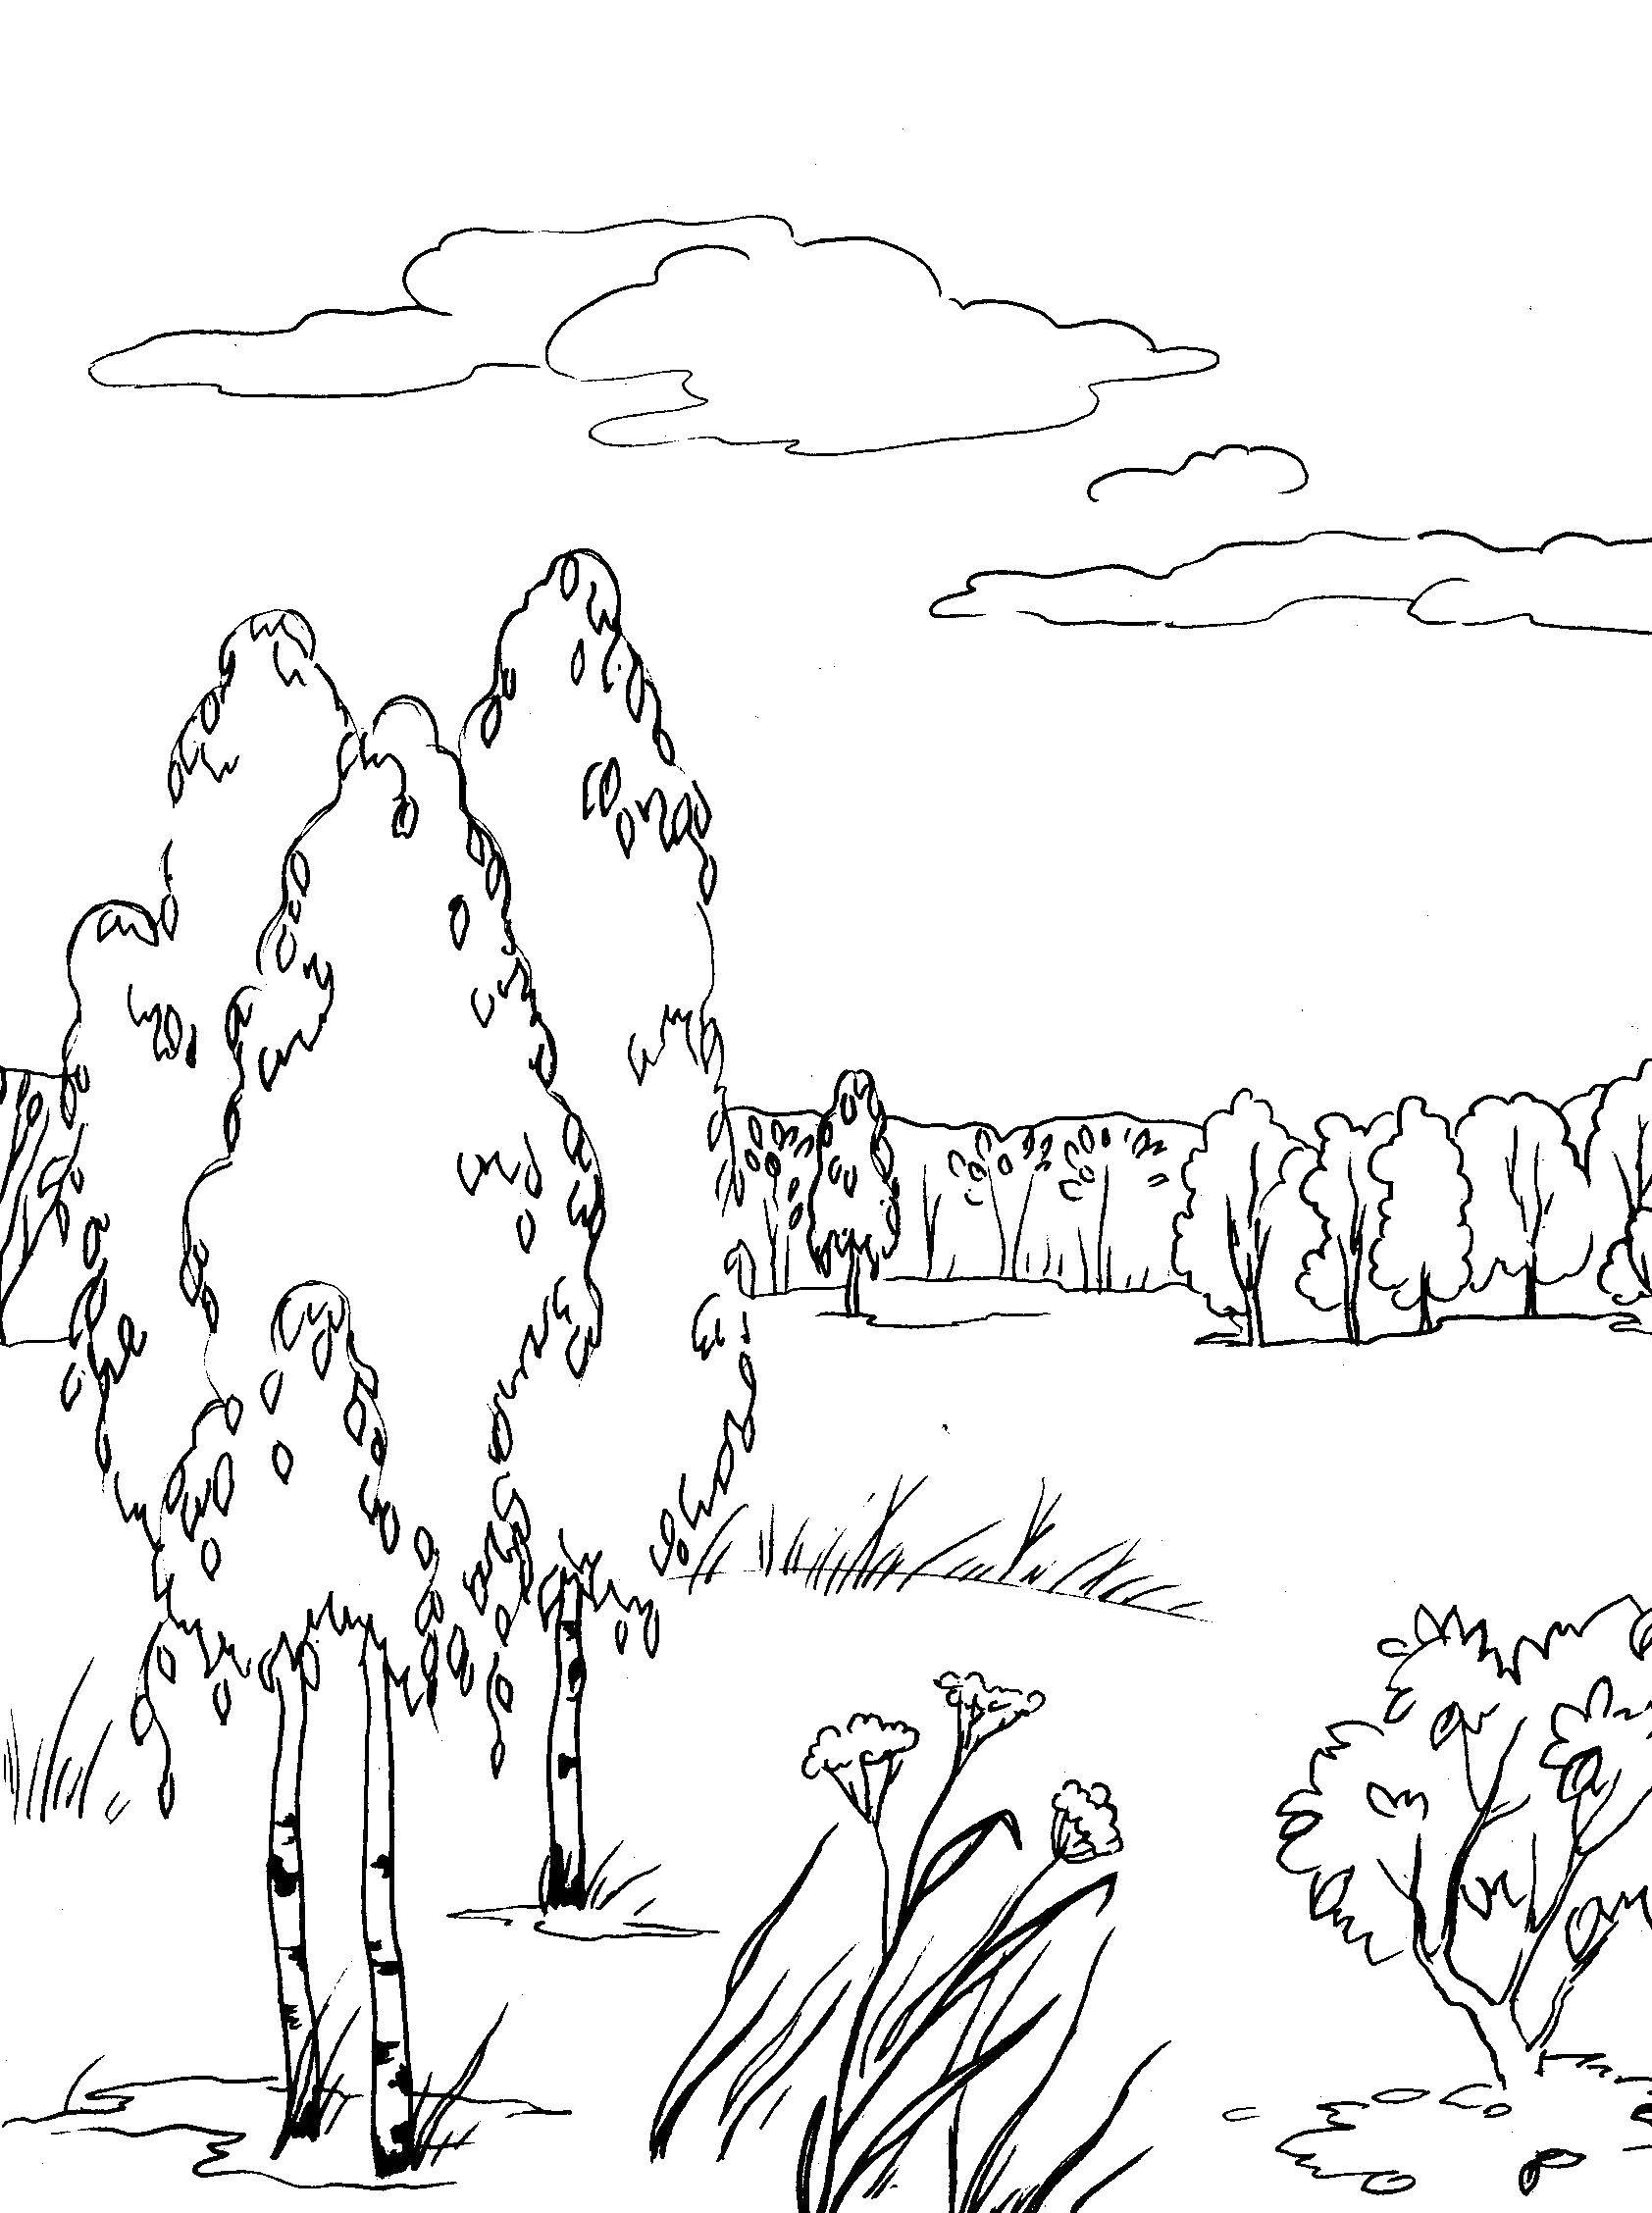 Coloring Birch grove. Category the forest. Tags:  Forest, birch.